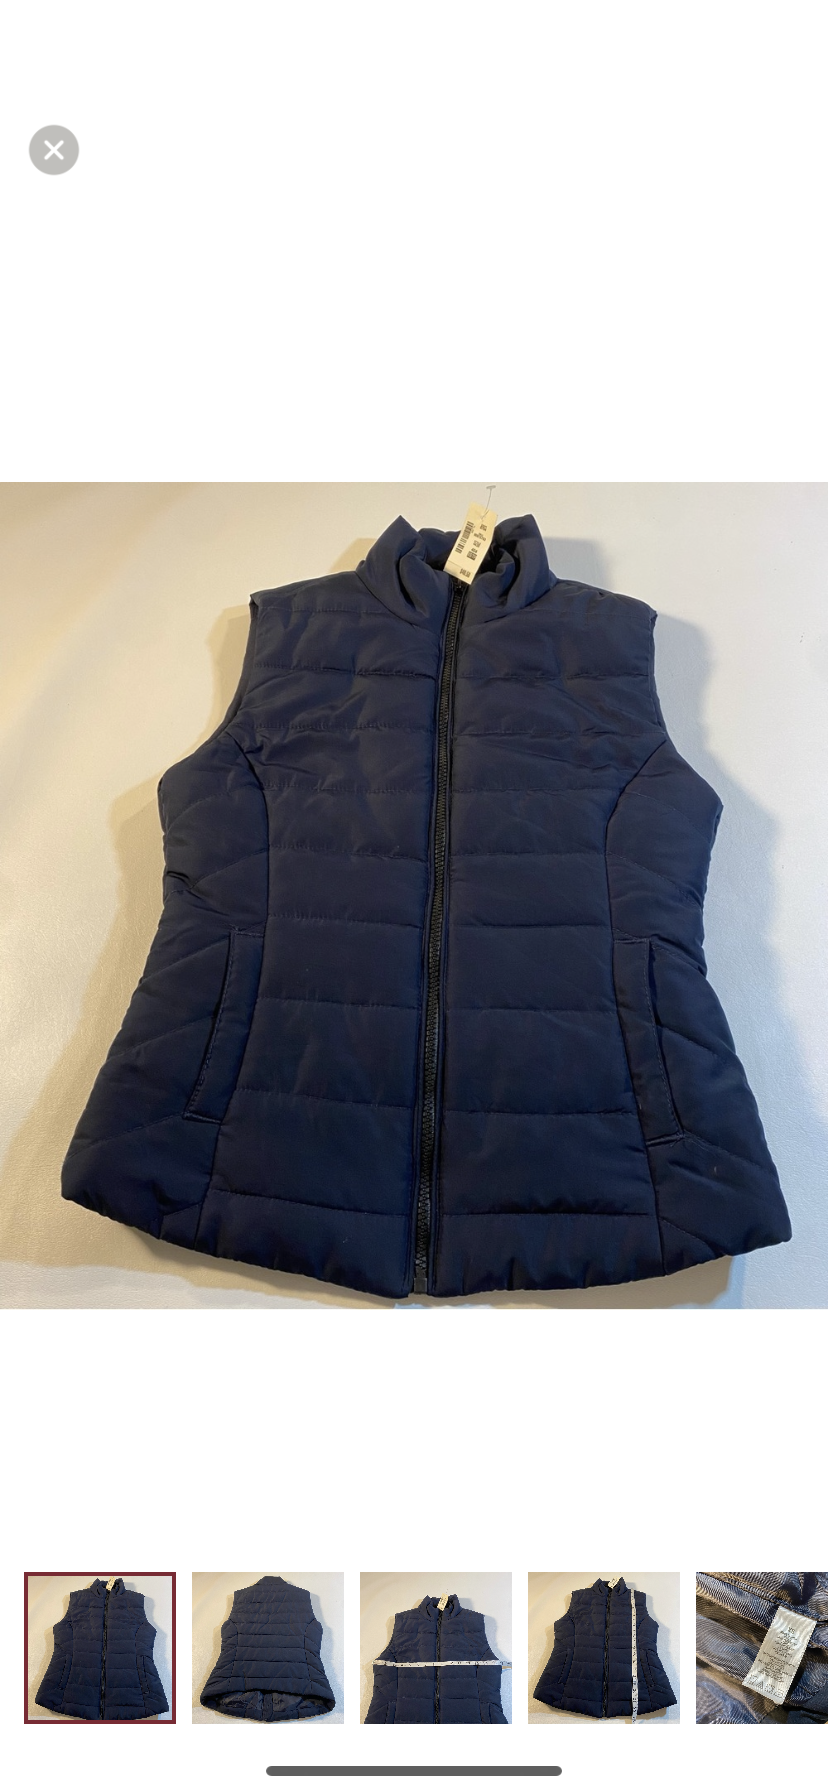 NWT $50 Aeropostale Size XS Navy Blue Quilted Full Zip Vest